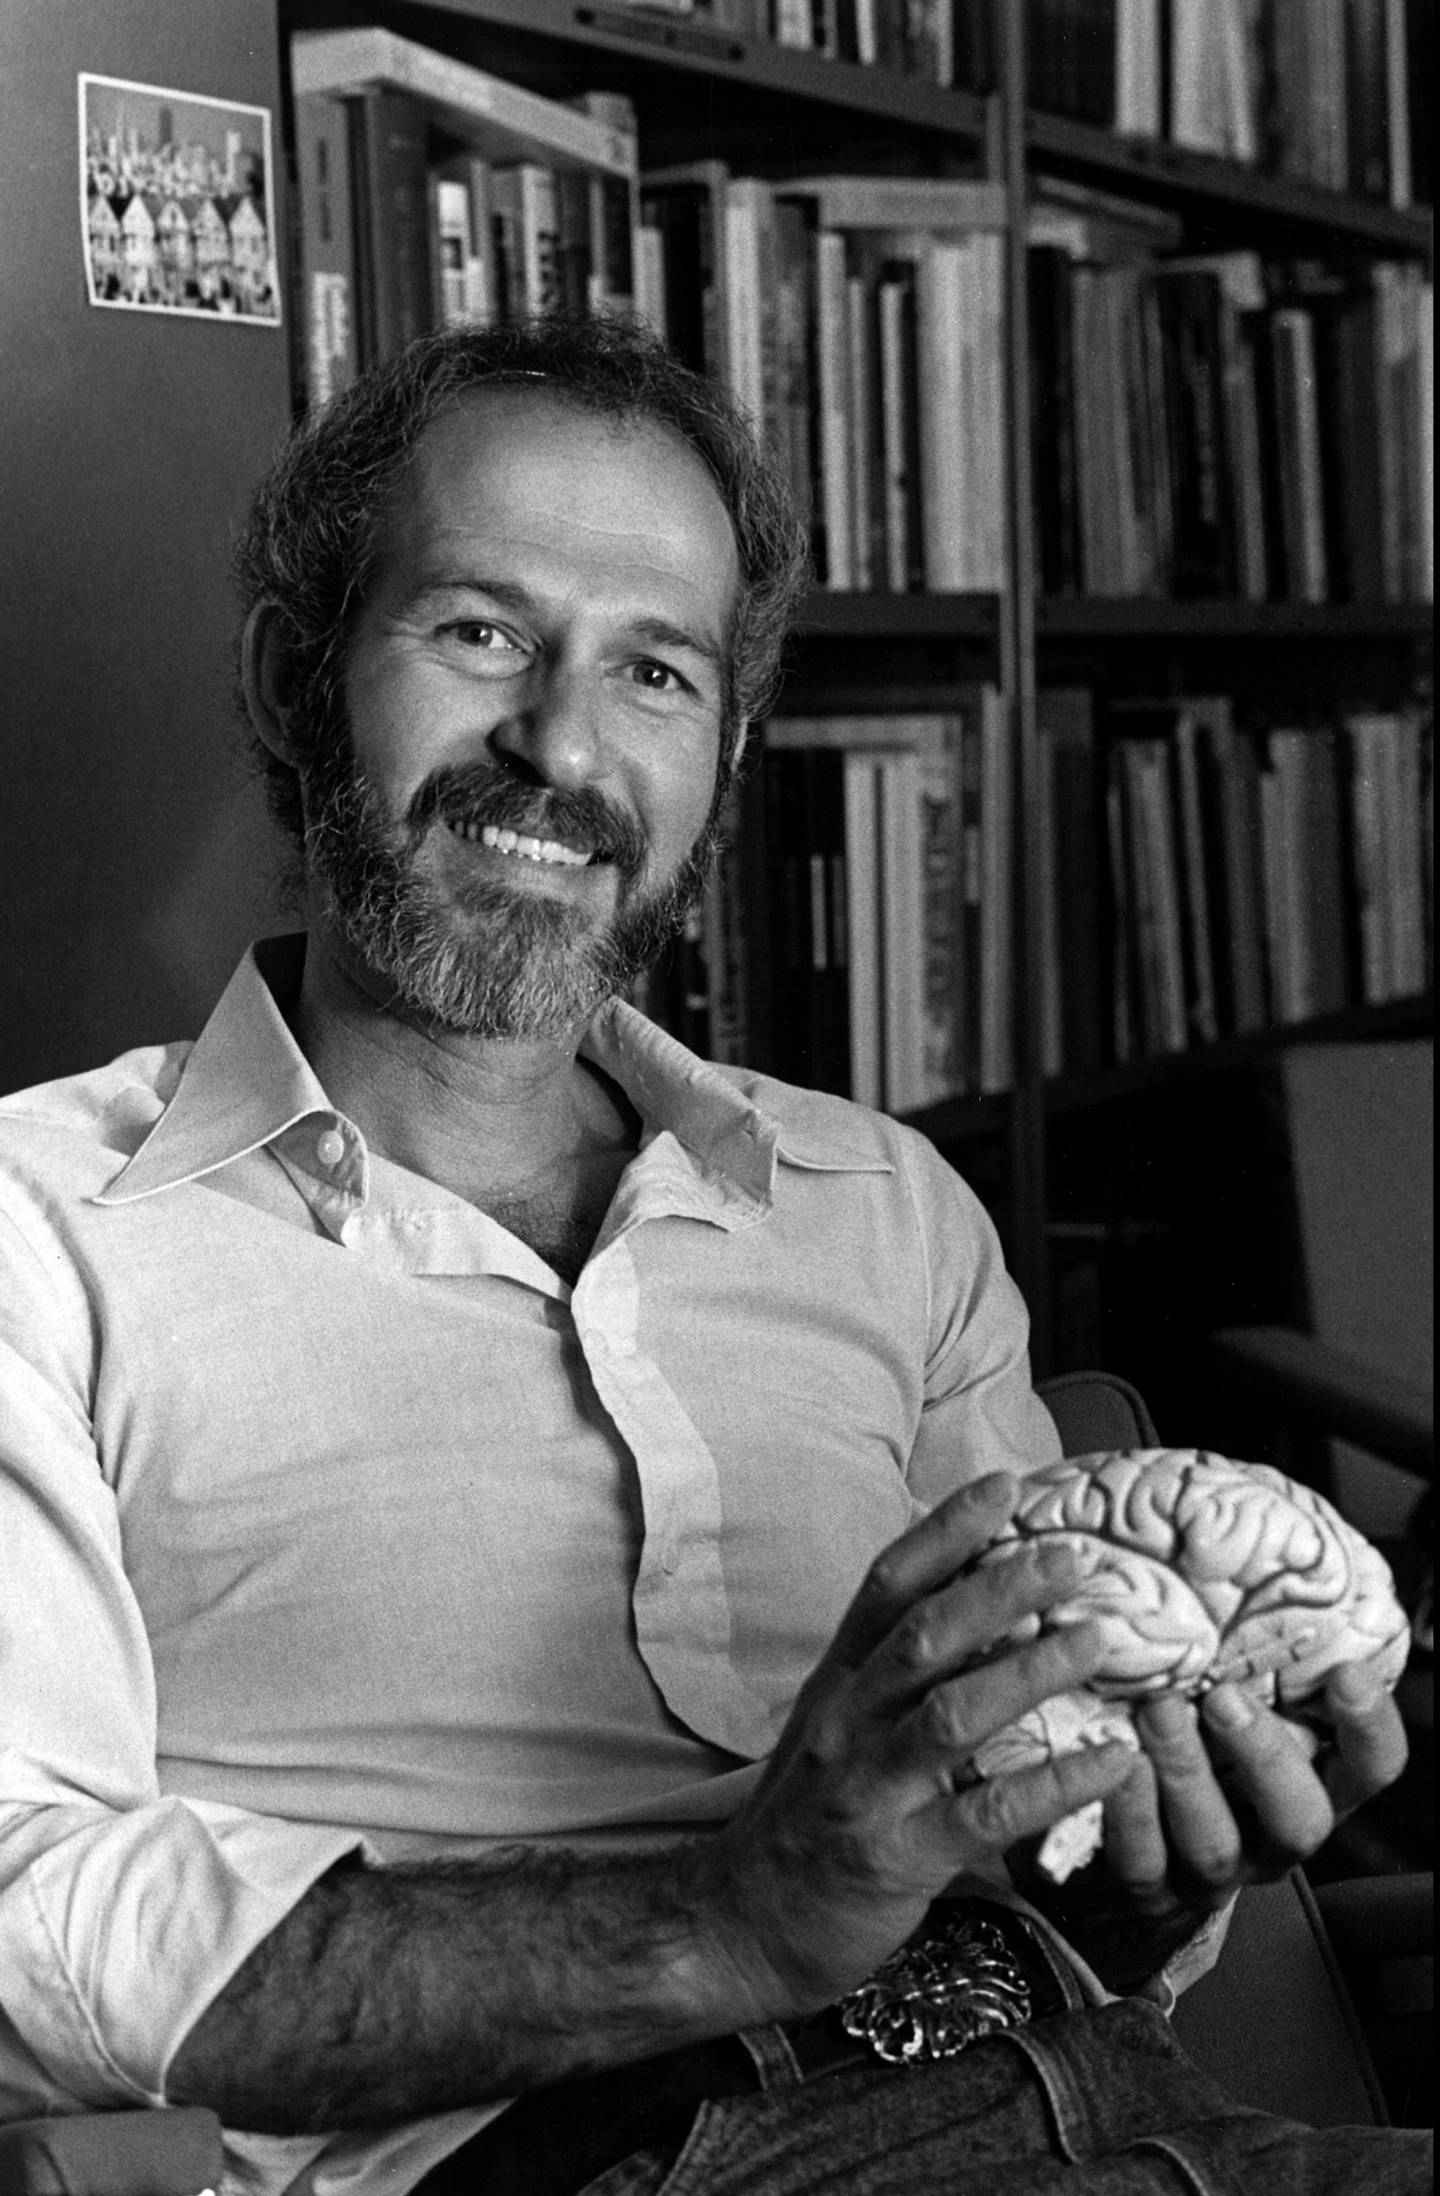 Barry Jacobs holds a model of a human brain